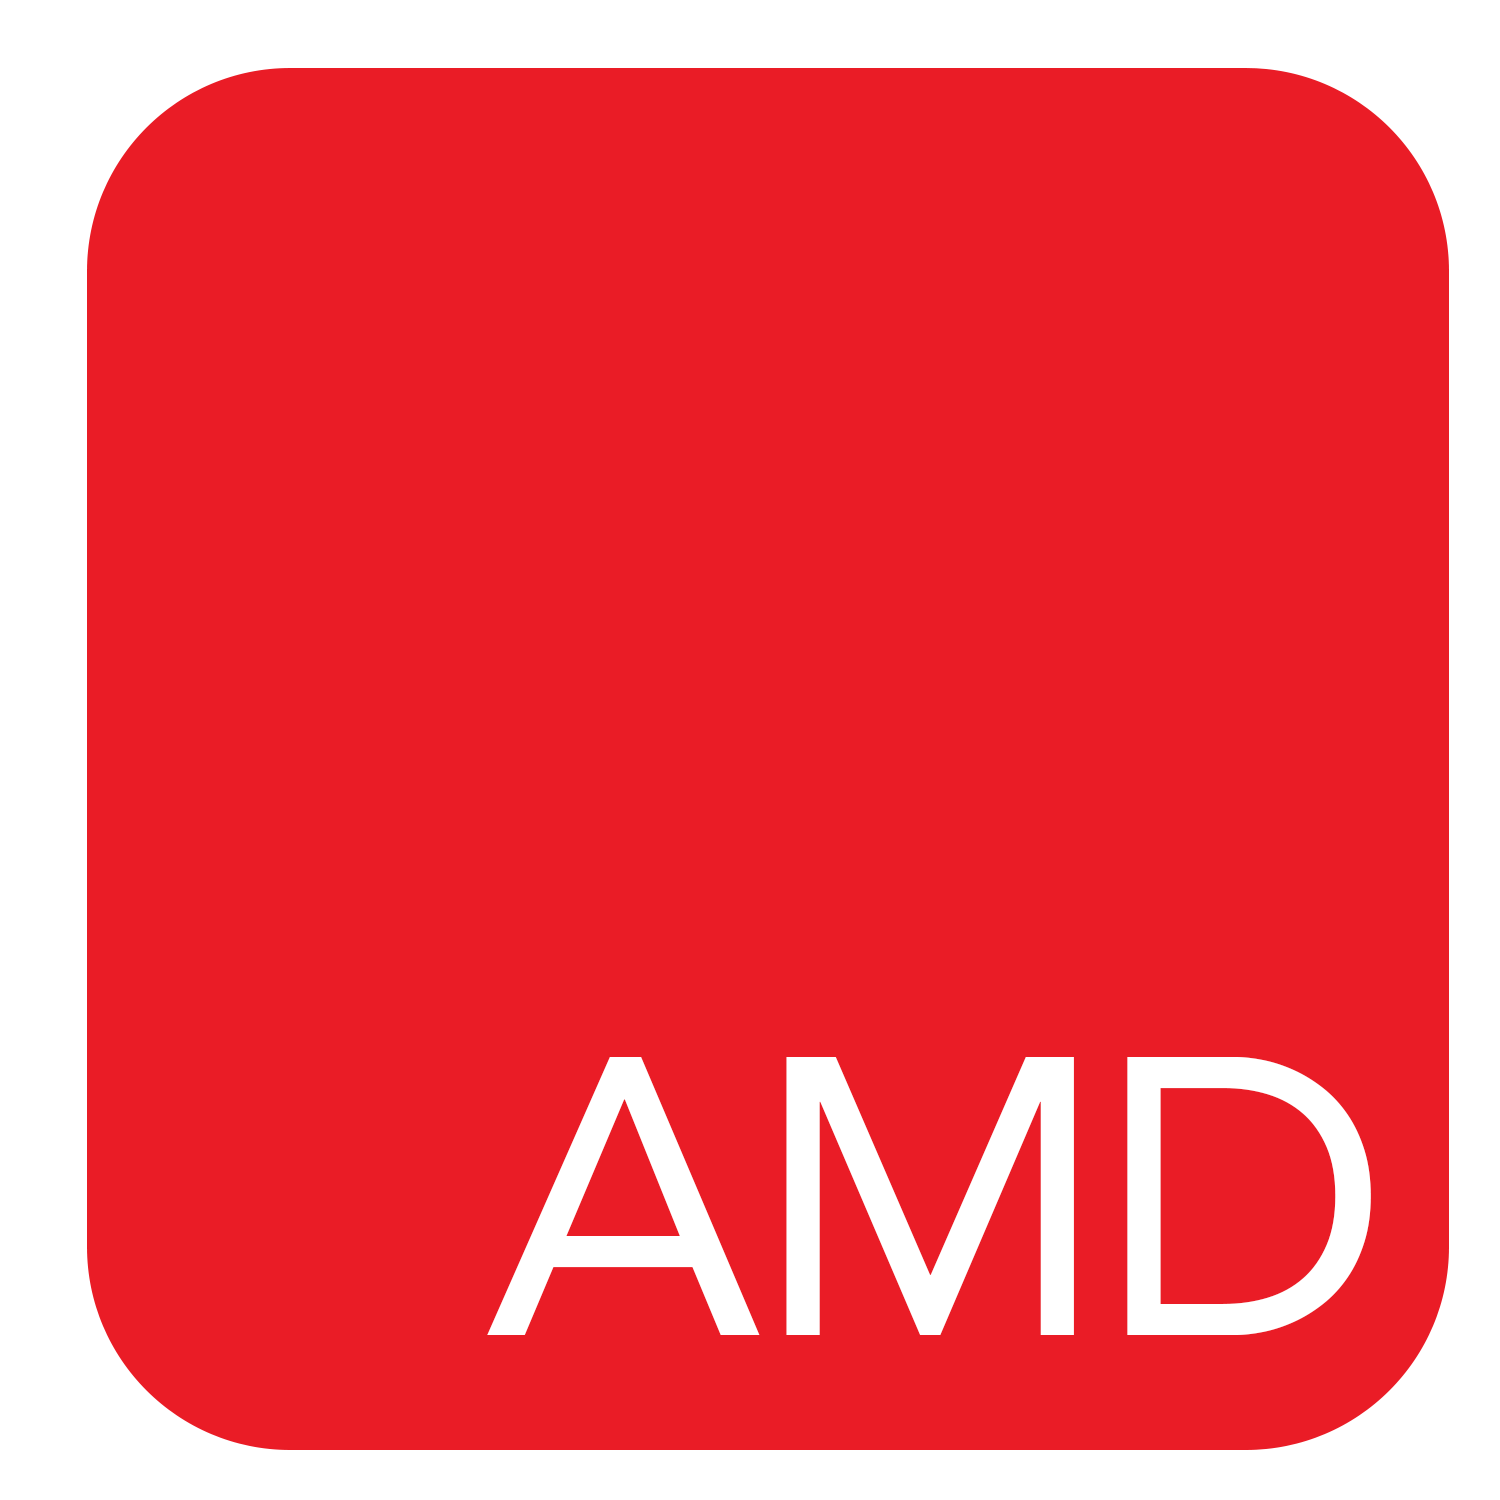 How to fix AMD software stuck downloading or installing updates.